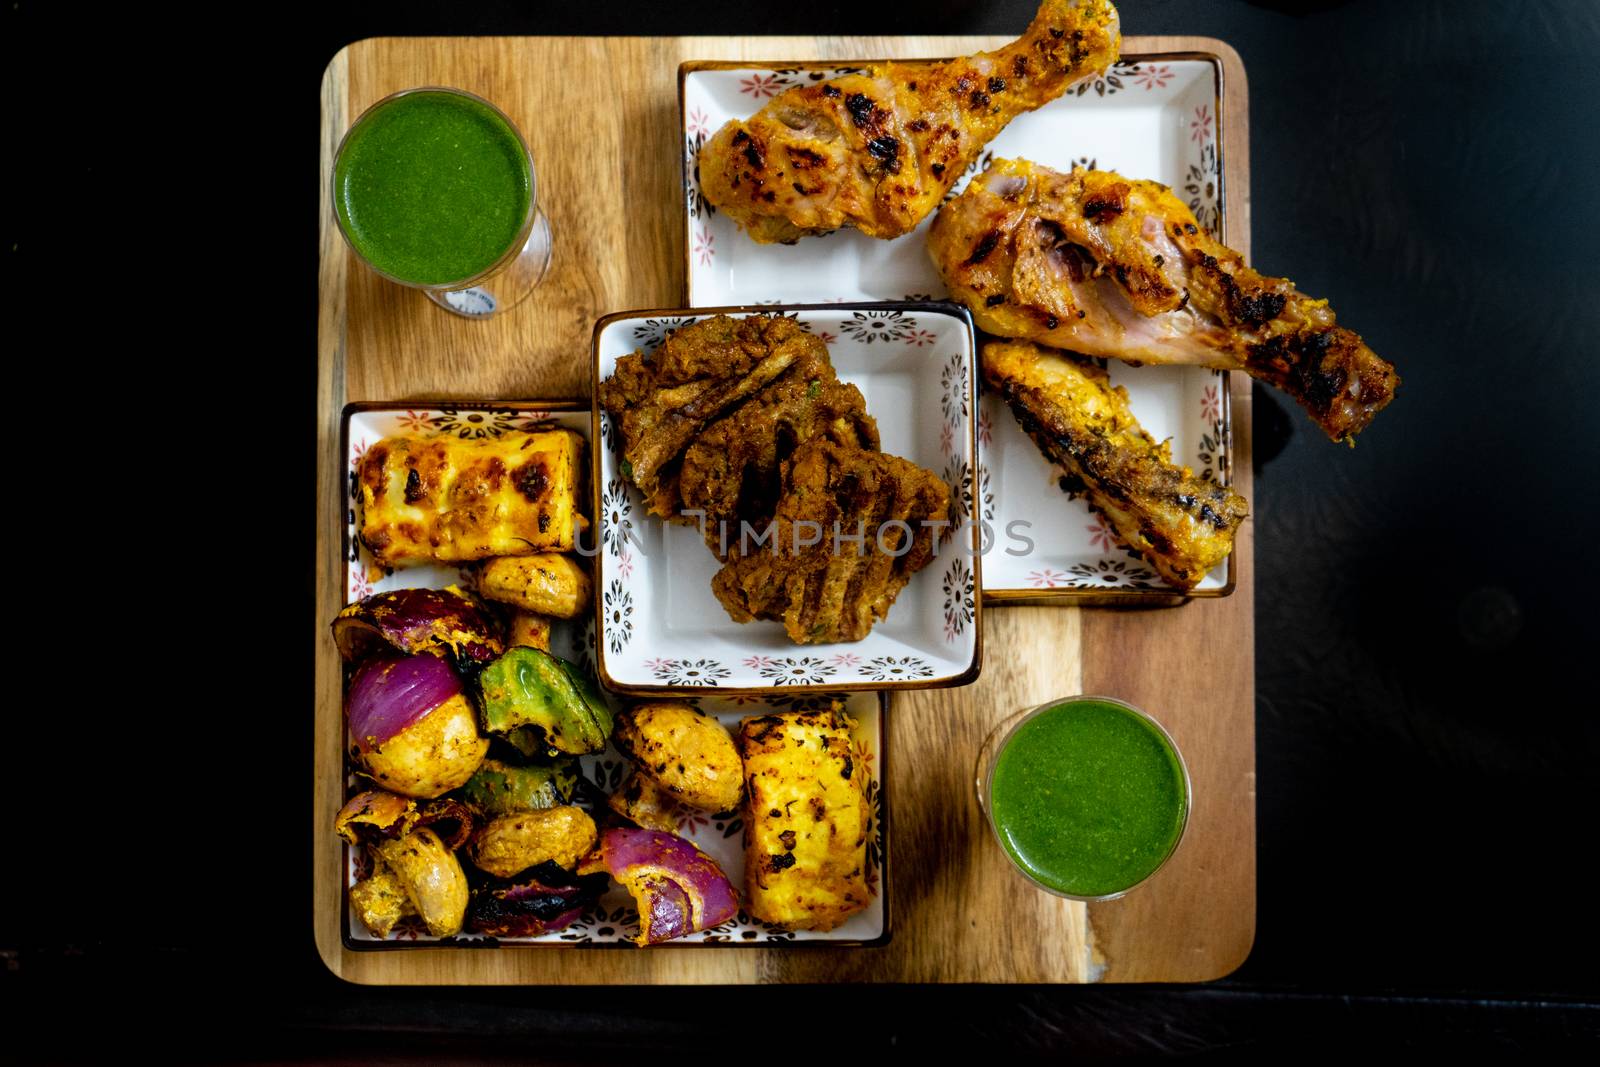 shot of delicious chicken drum sticks legs, lollypop, mutton patties, cottage cheese, mint chutney in glasses for a punjabi north indian barbeque meal by Shalinimathur